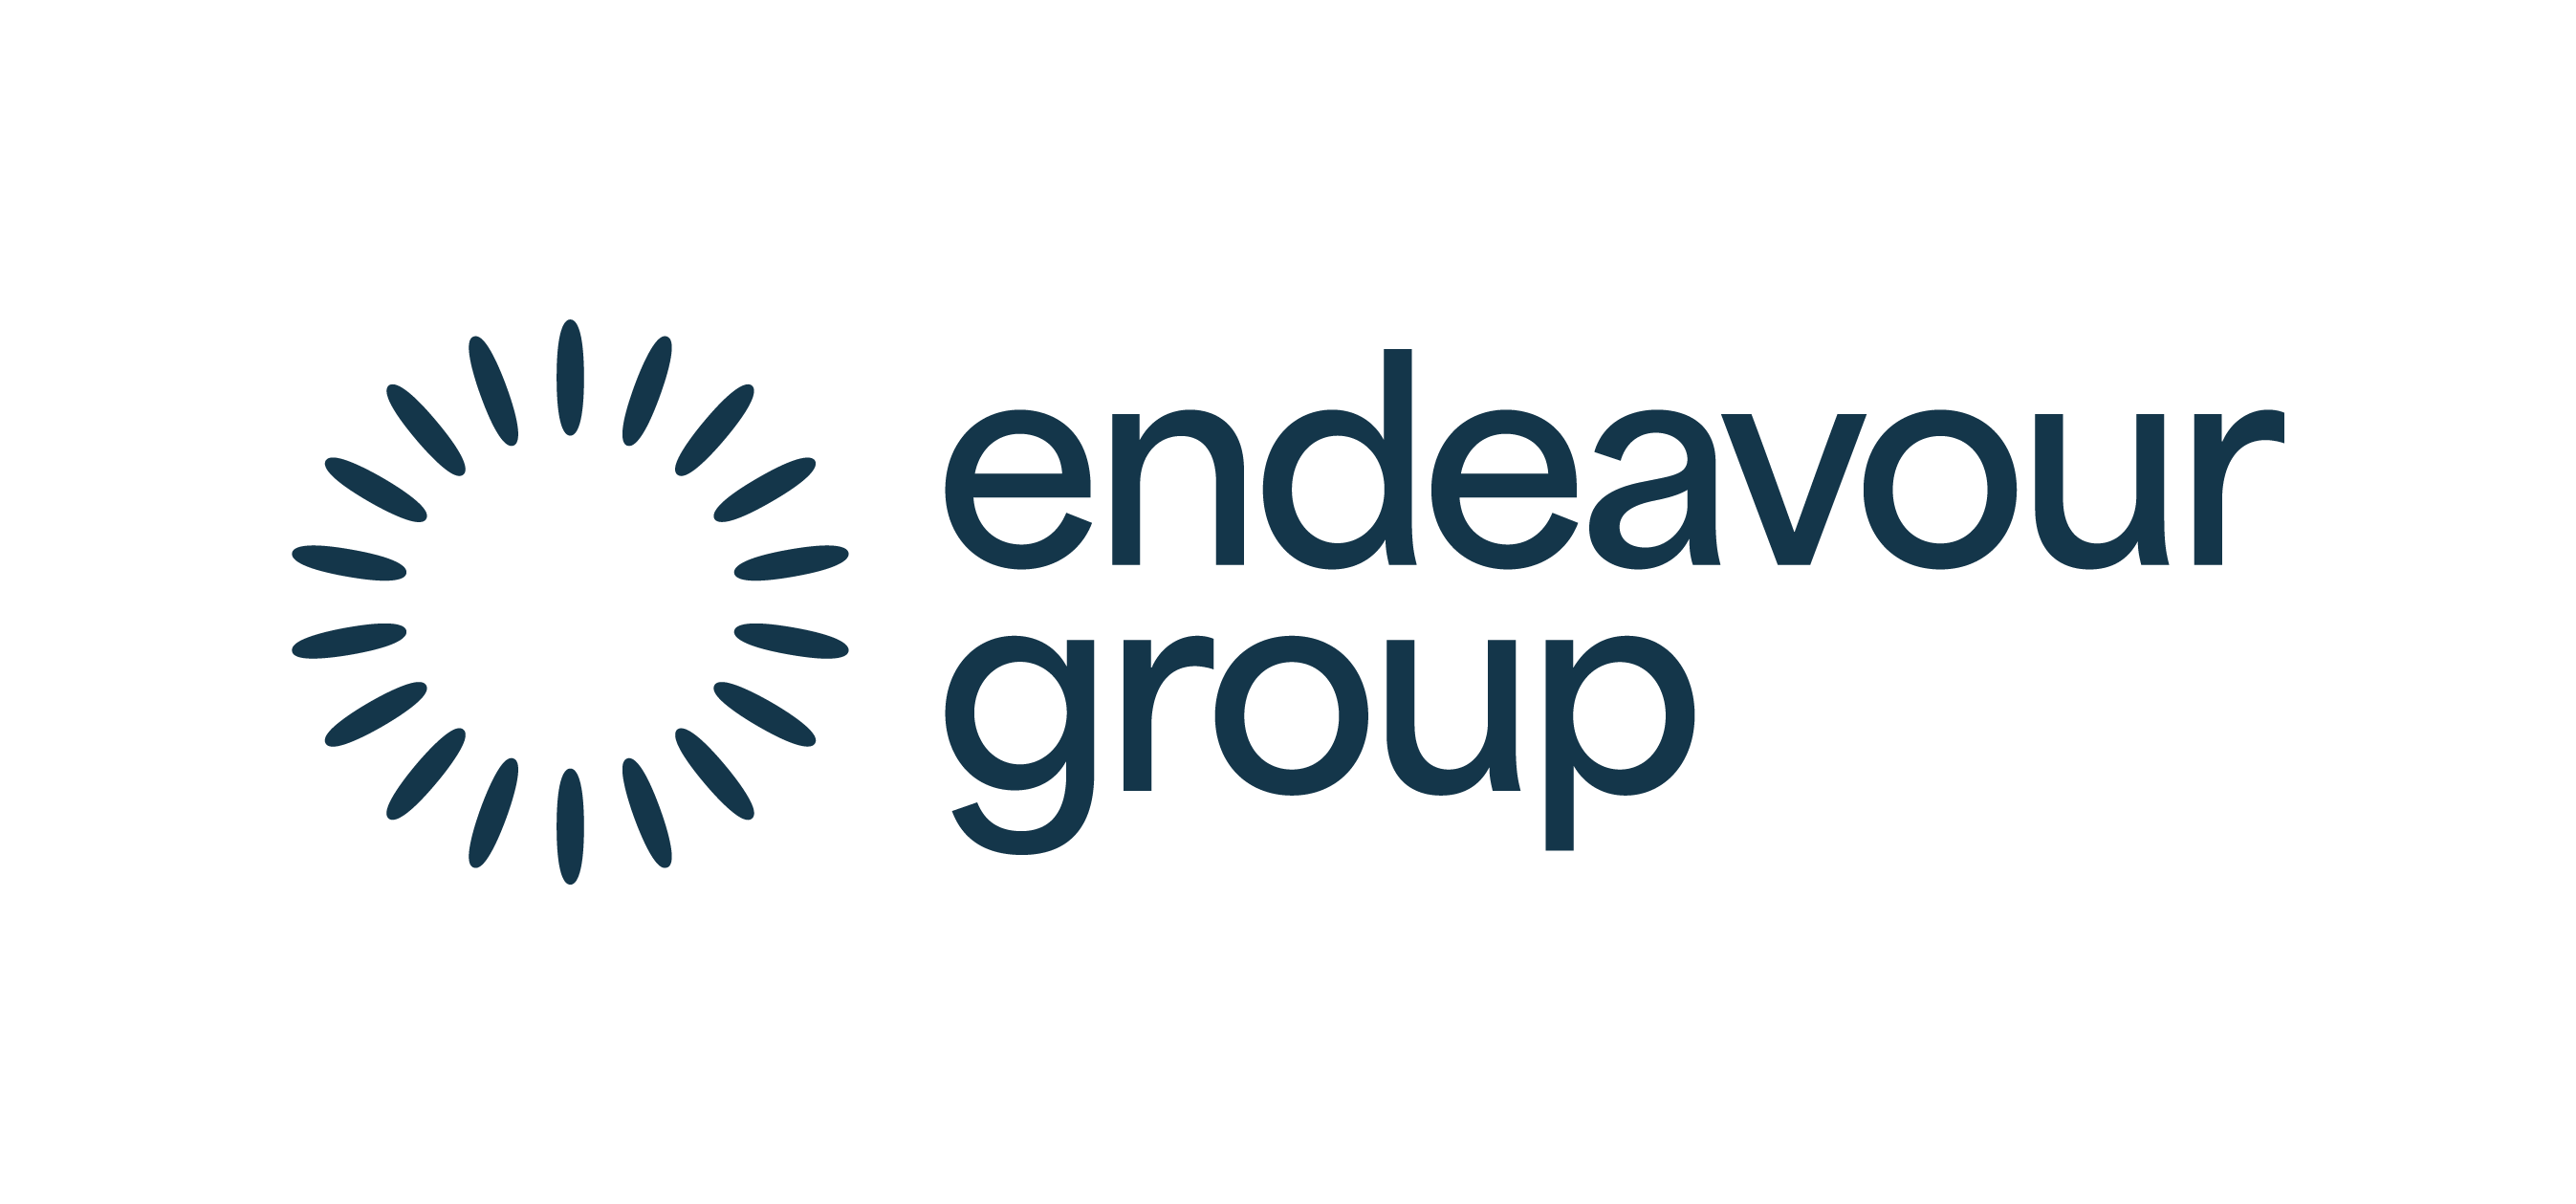 Endeavour Group Limited